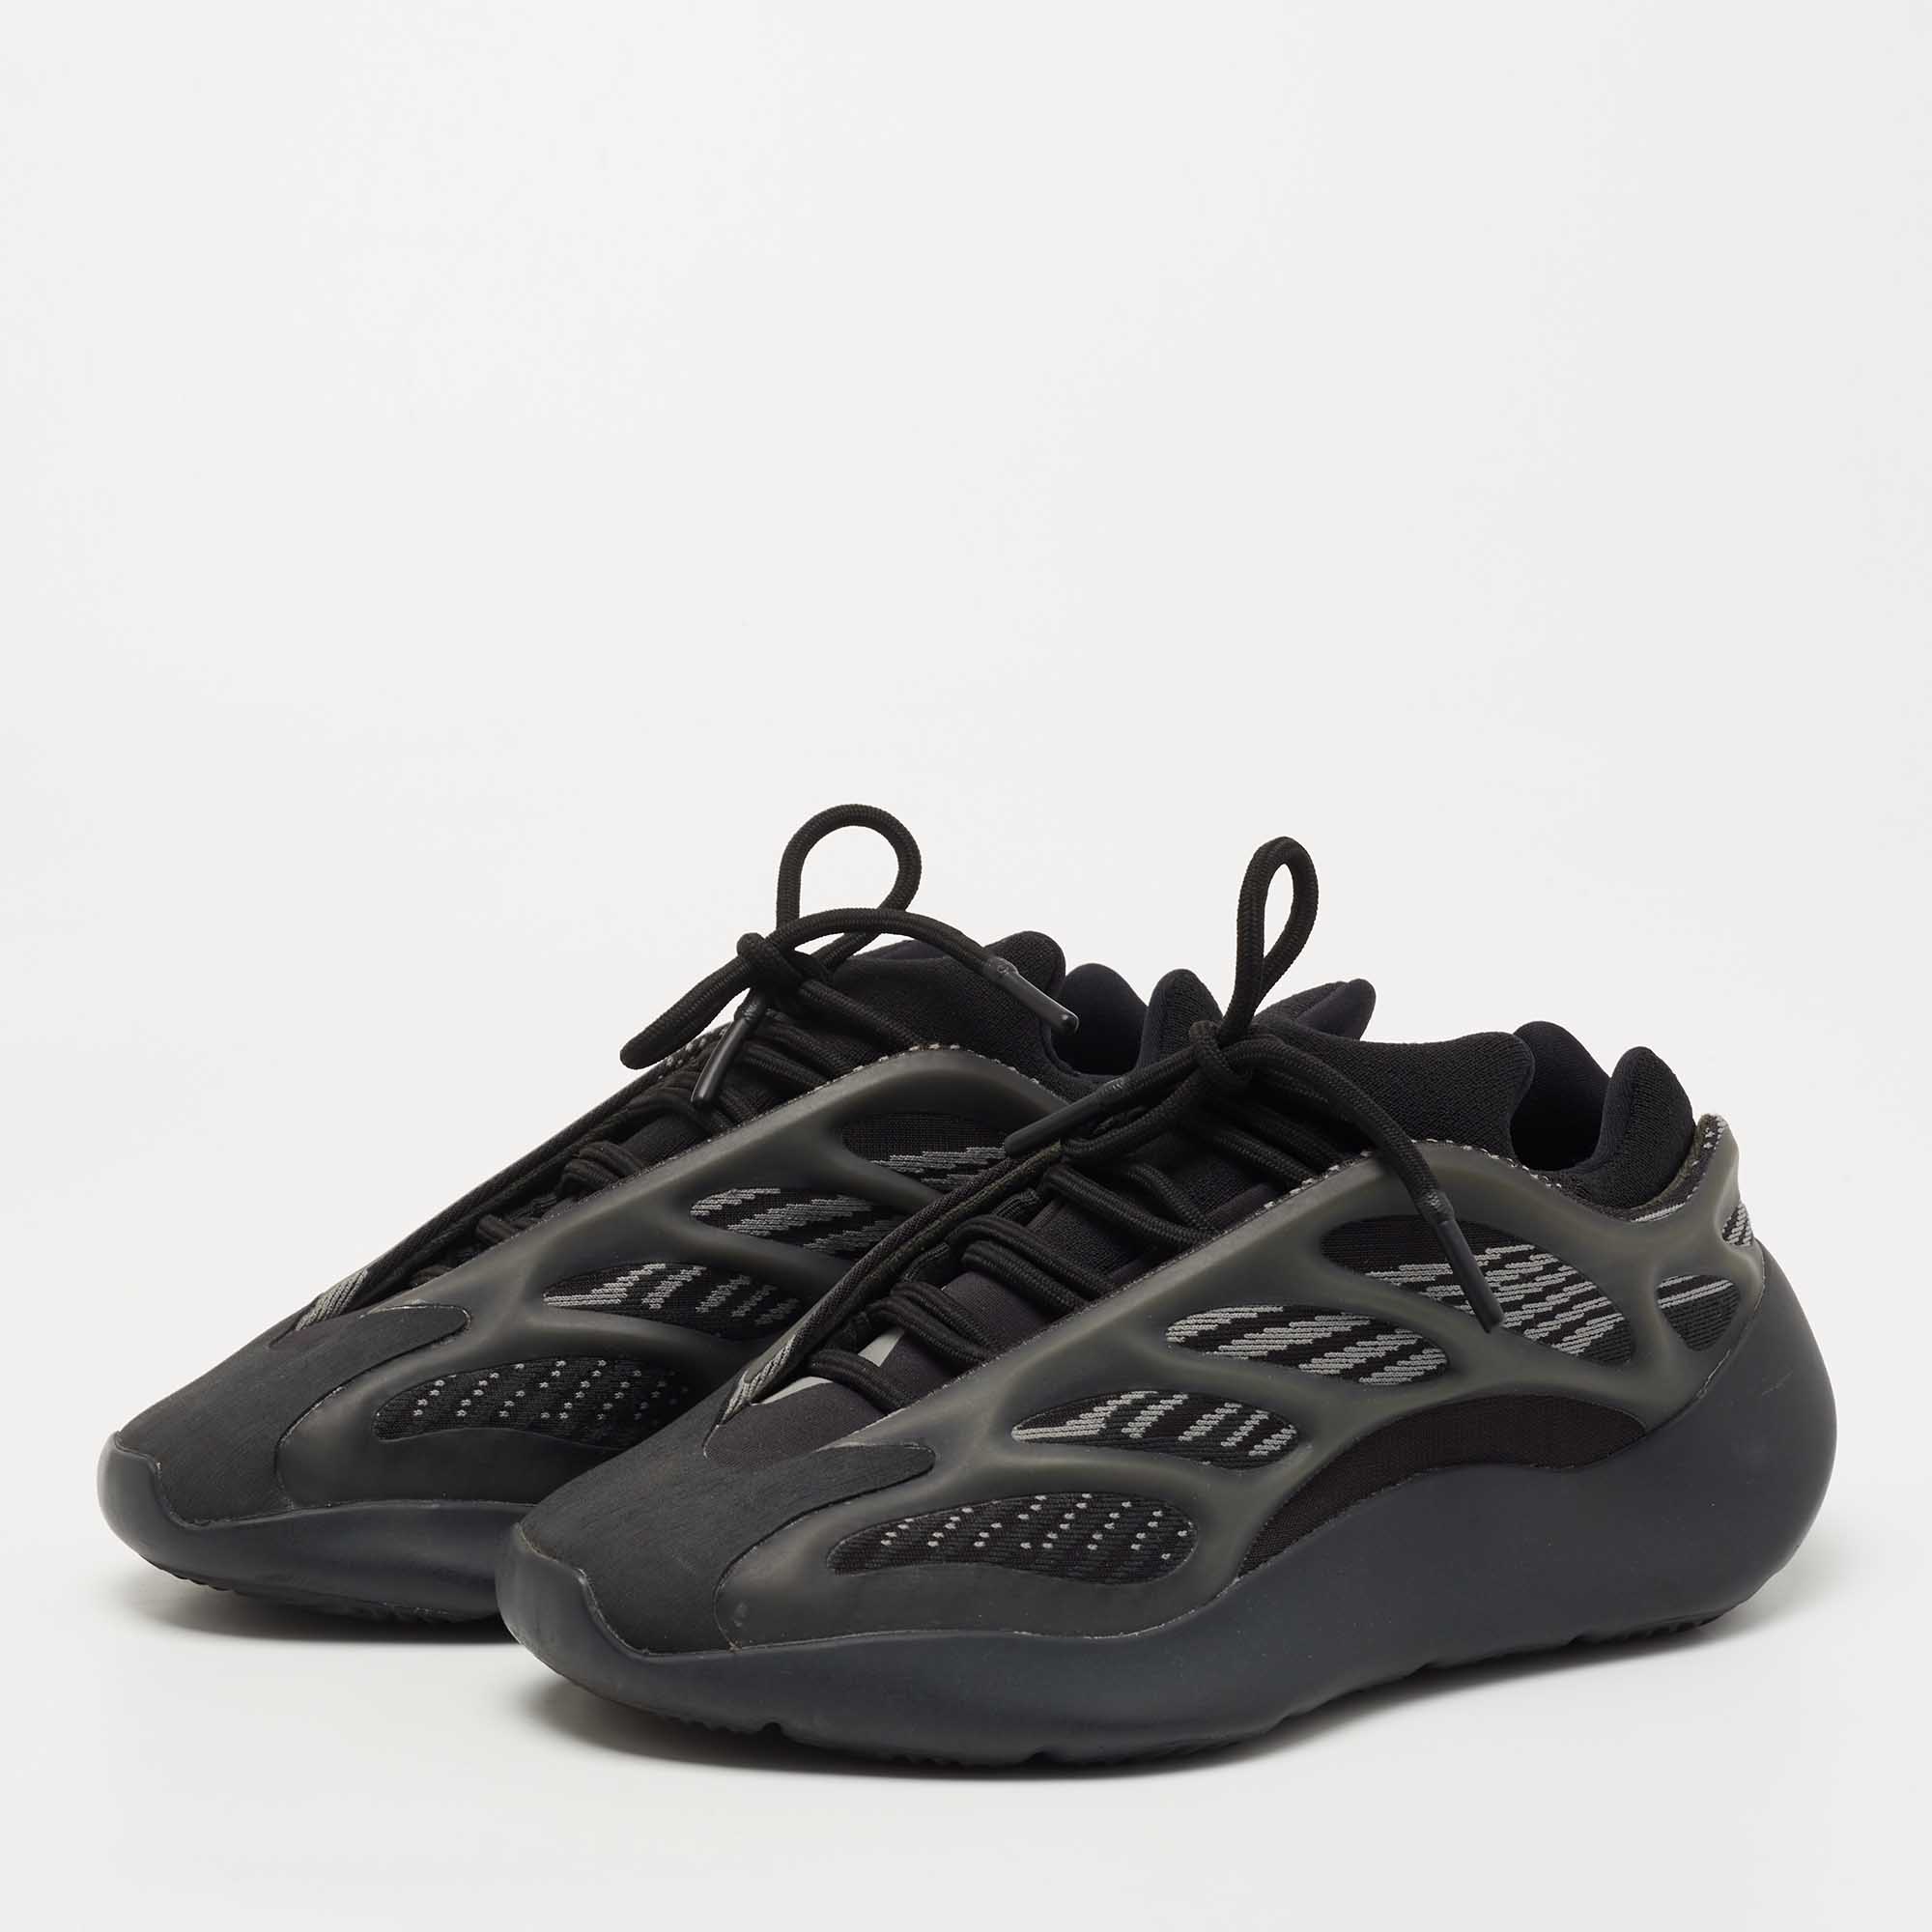 

Yeezy x Adidas Black Fabric and Rubber YEEZY 700 V3 "Alvah" Sneakers Size 37 1/3